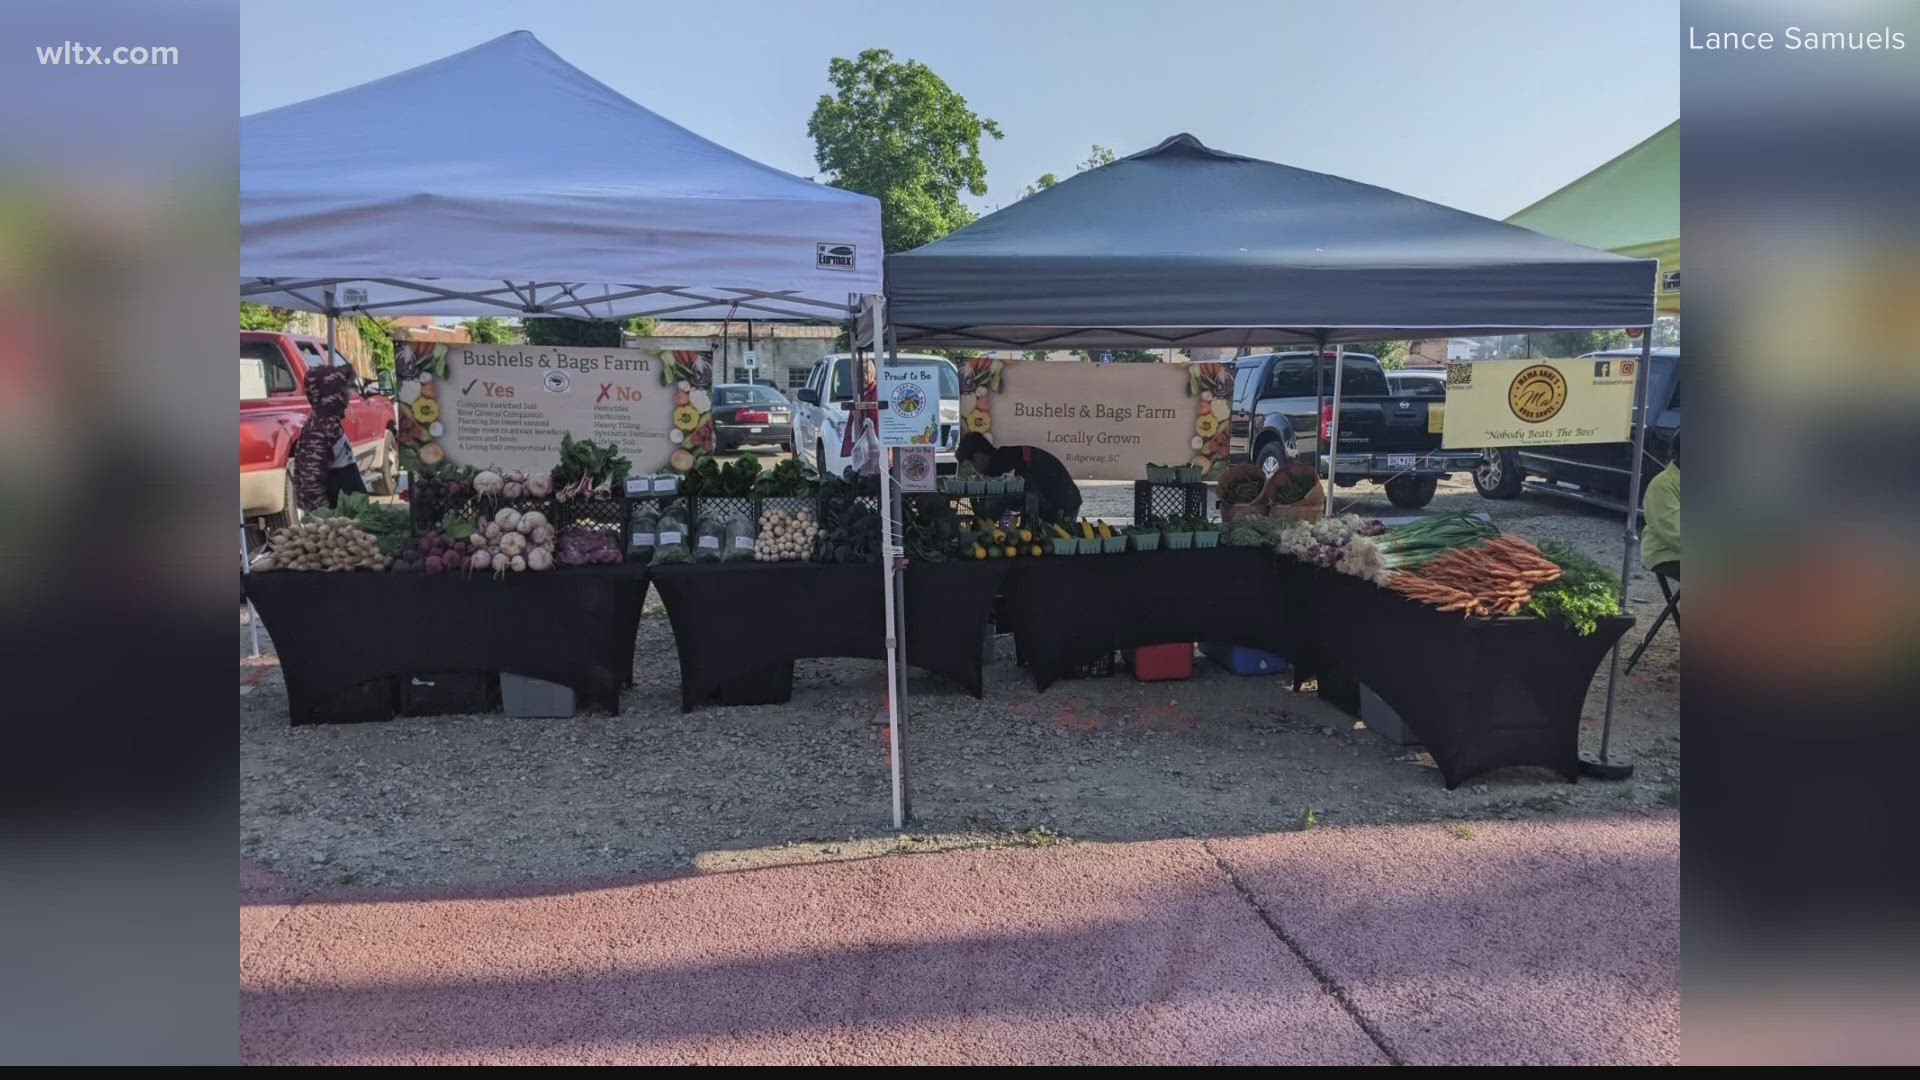 The market won 5th in the country and first in the state for top farmer's market.